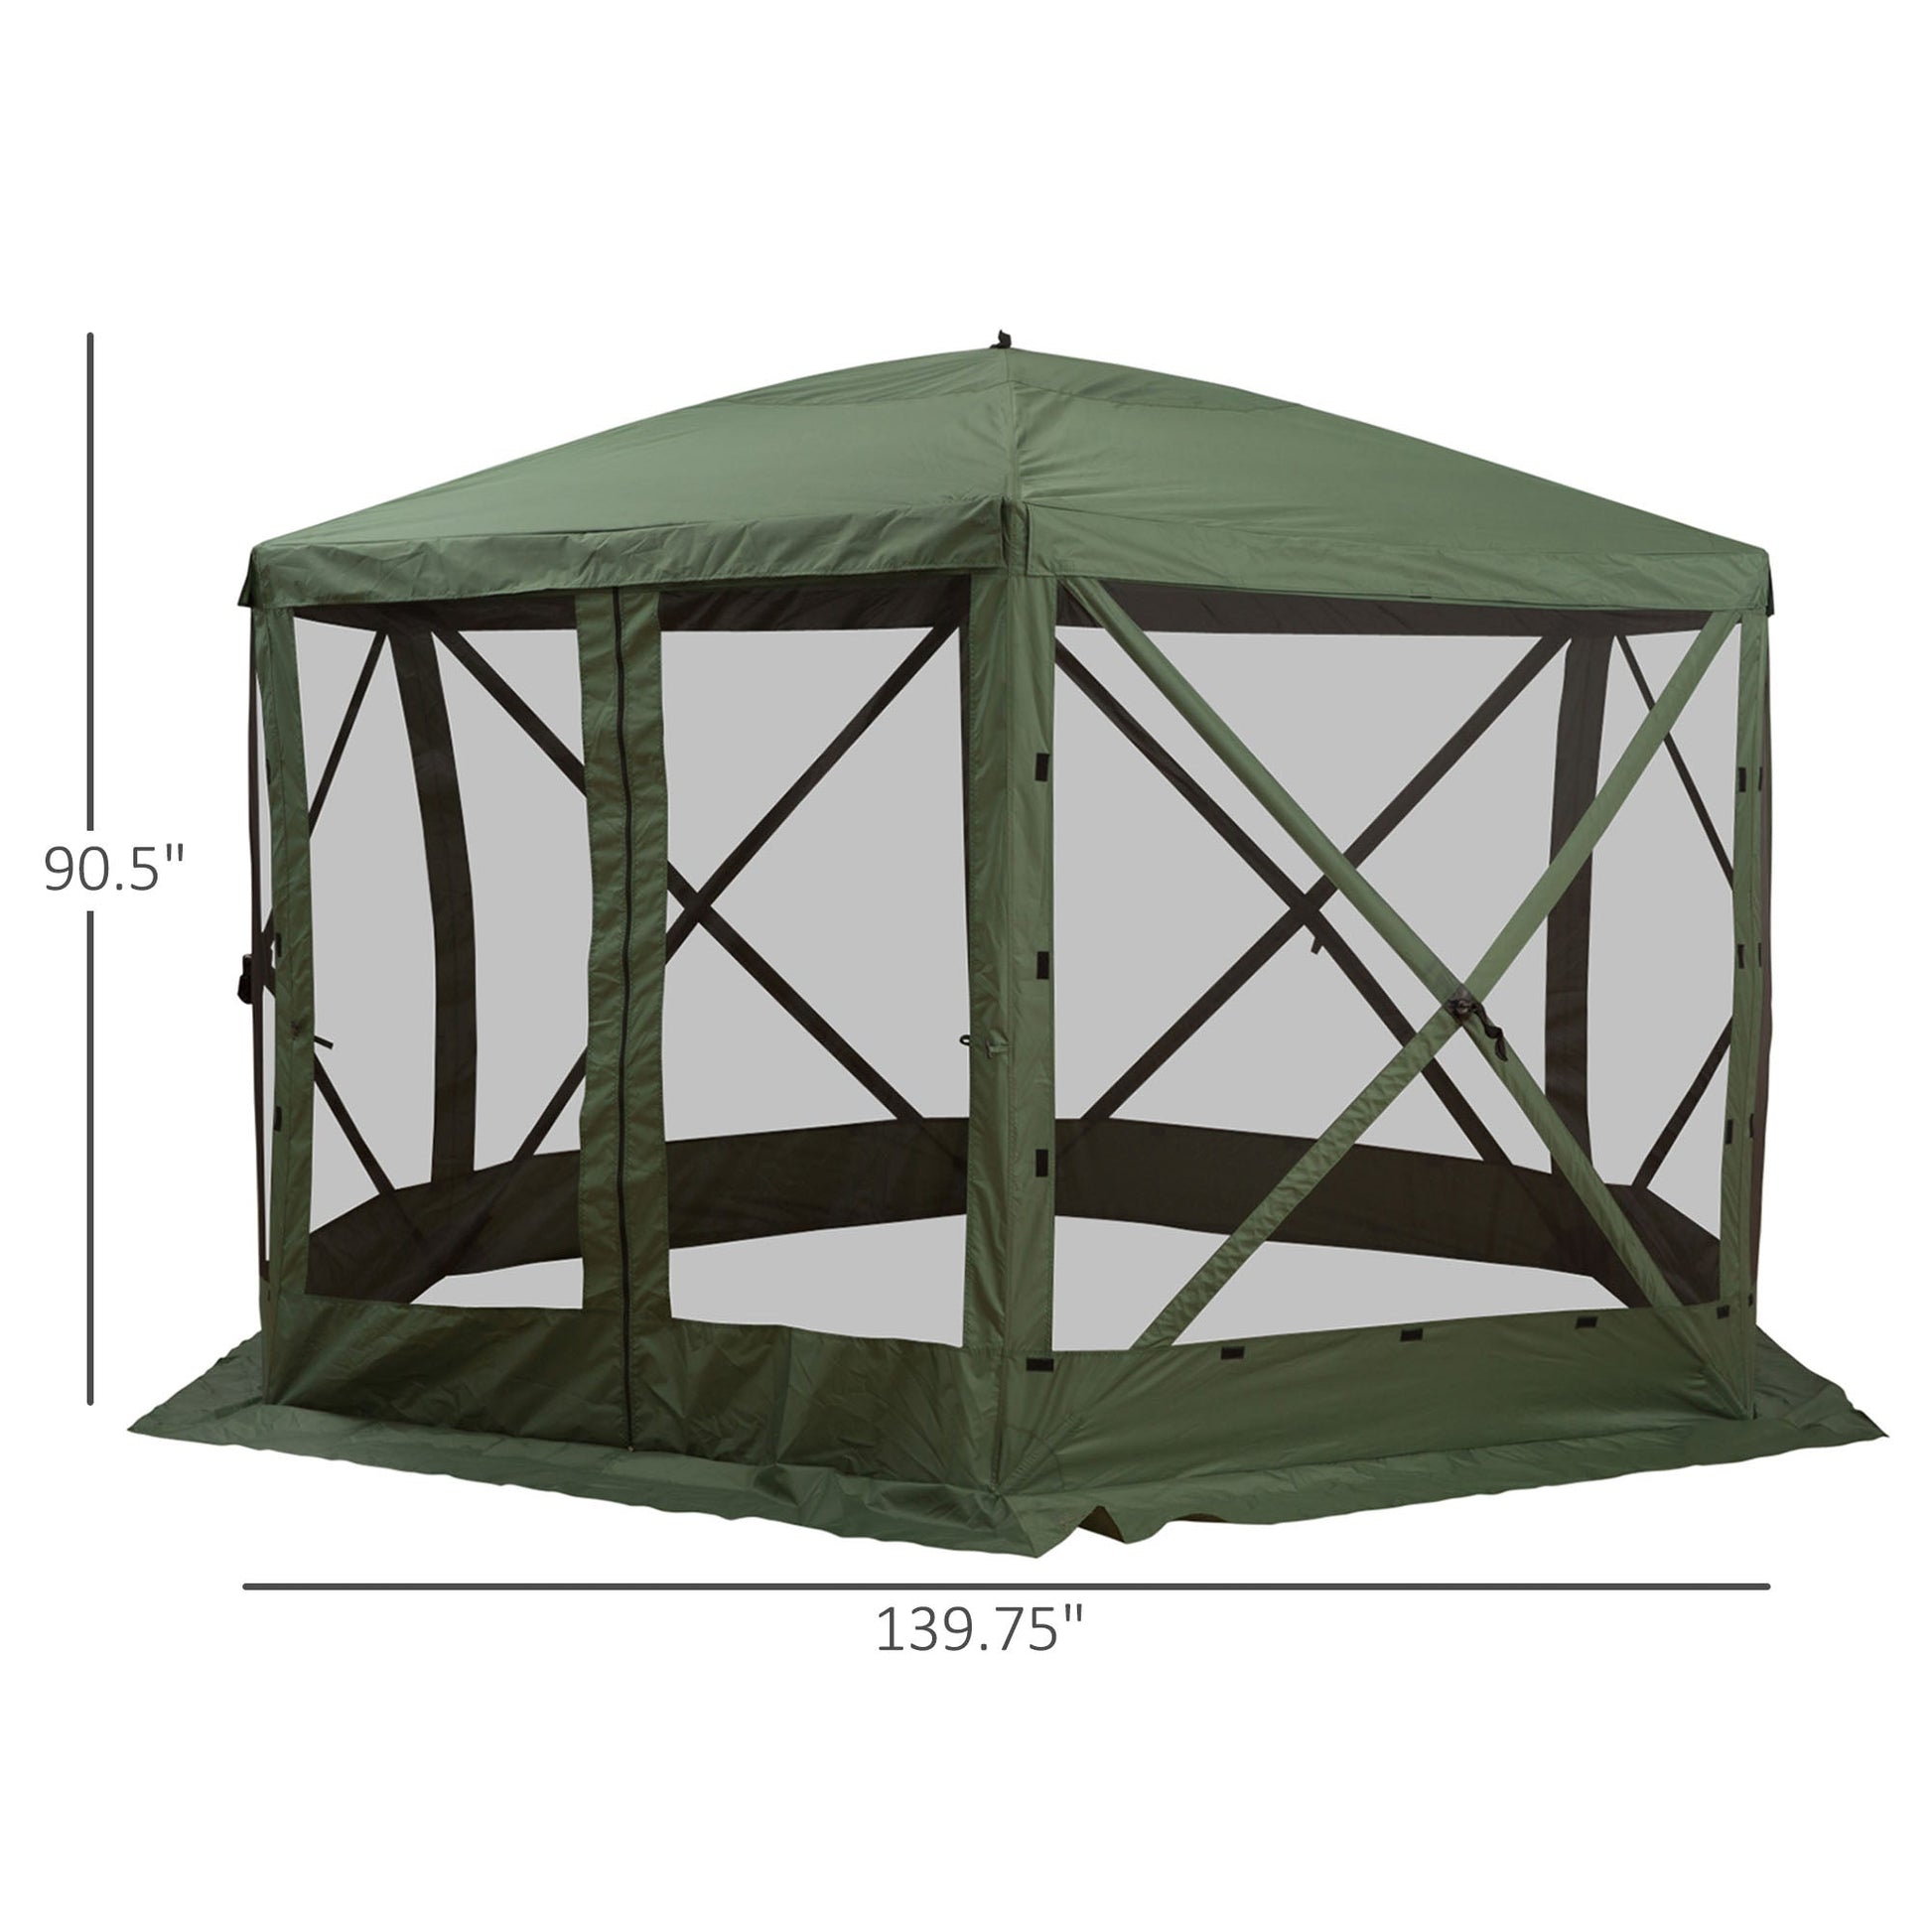 12' x 12' Hexagon Automatic Pop Up Screen Tents Camping Shelter Picnic Canopy Outdoor Sun Shade with Mesh Sidewalls and Carry Bag, Green at Gallery Canada